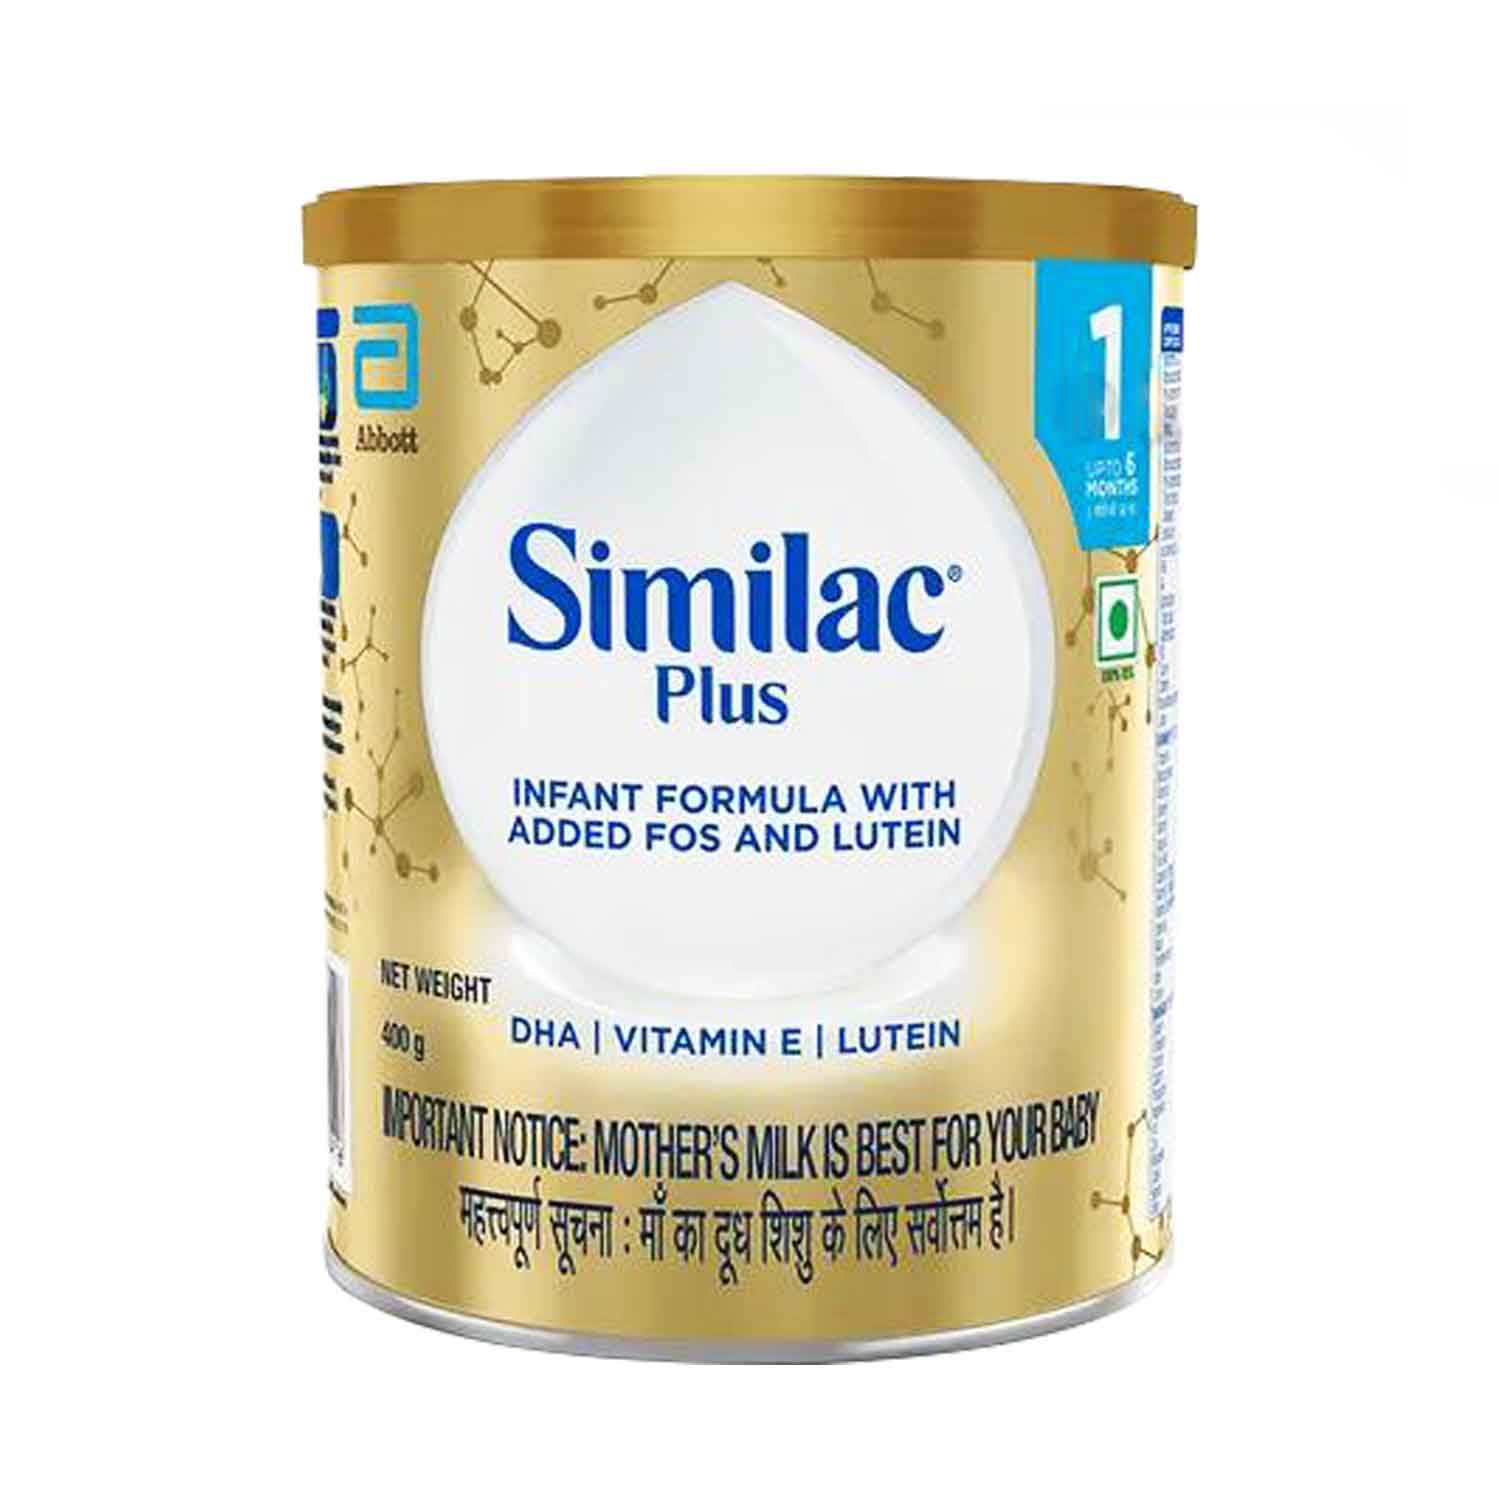 ABBOTT Similac IQ+ infant formula with added FOS and Lutein stage 1, 0 to 6 months - 400g